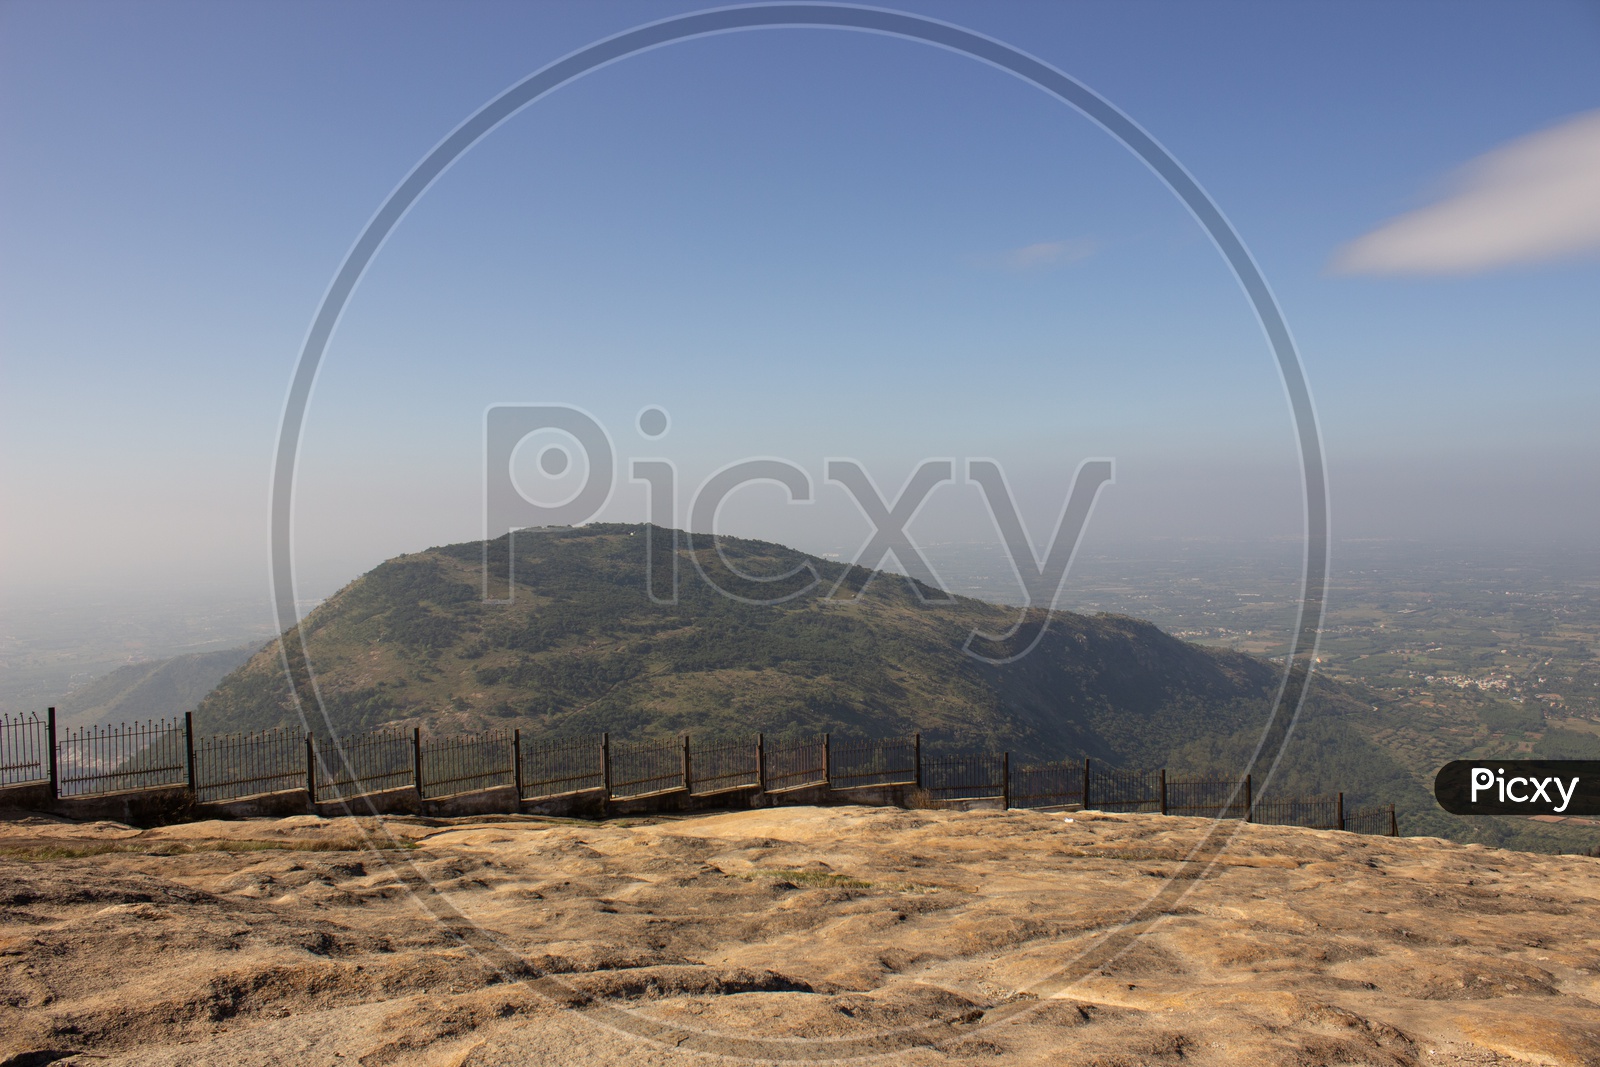 Views Of Nandi hills From Hill Tops